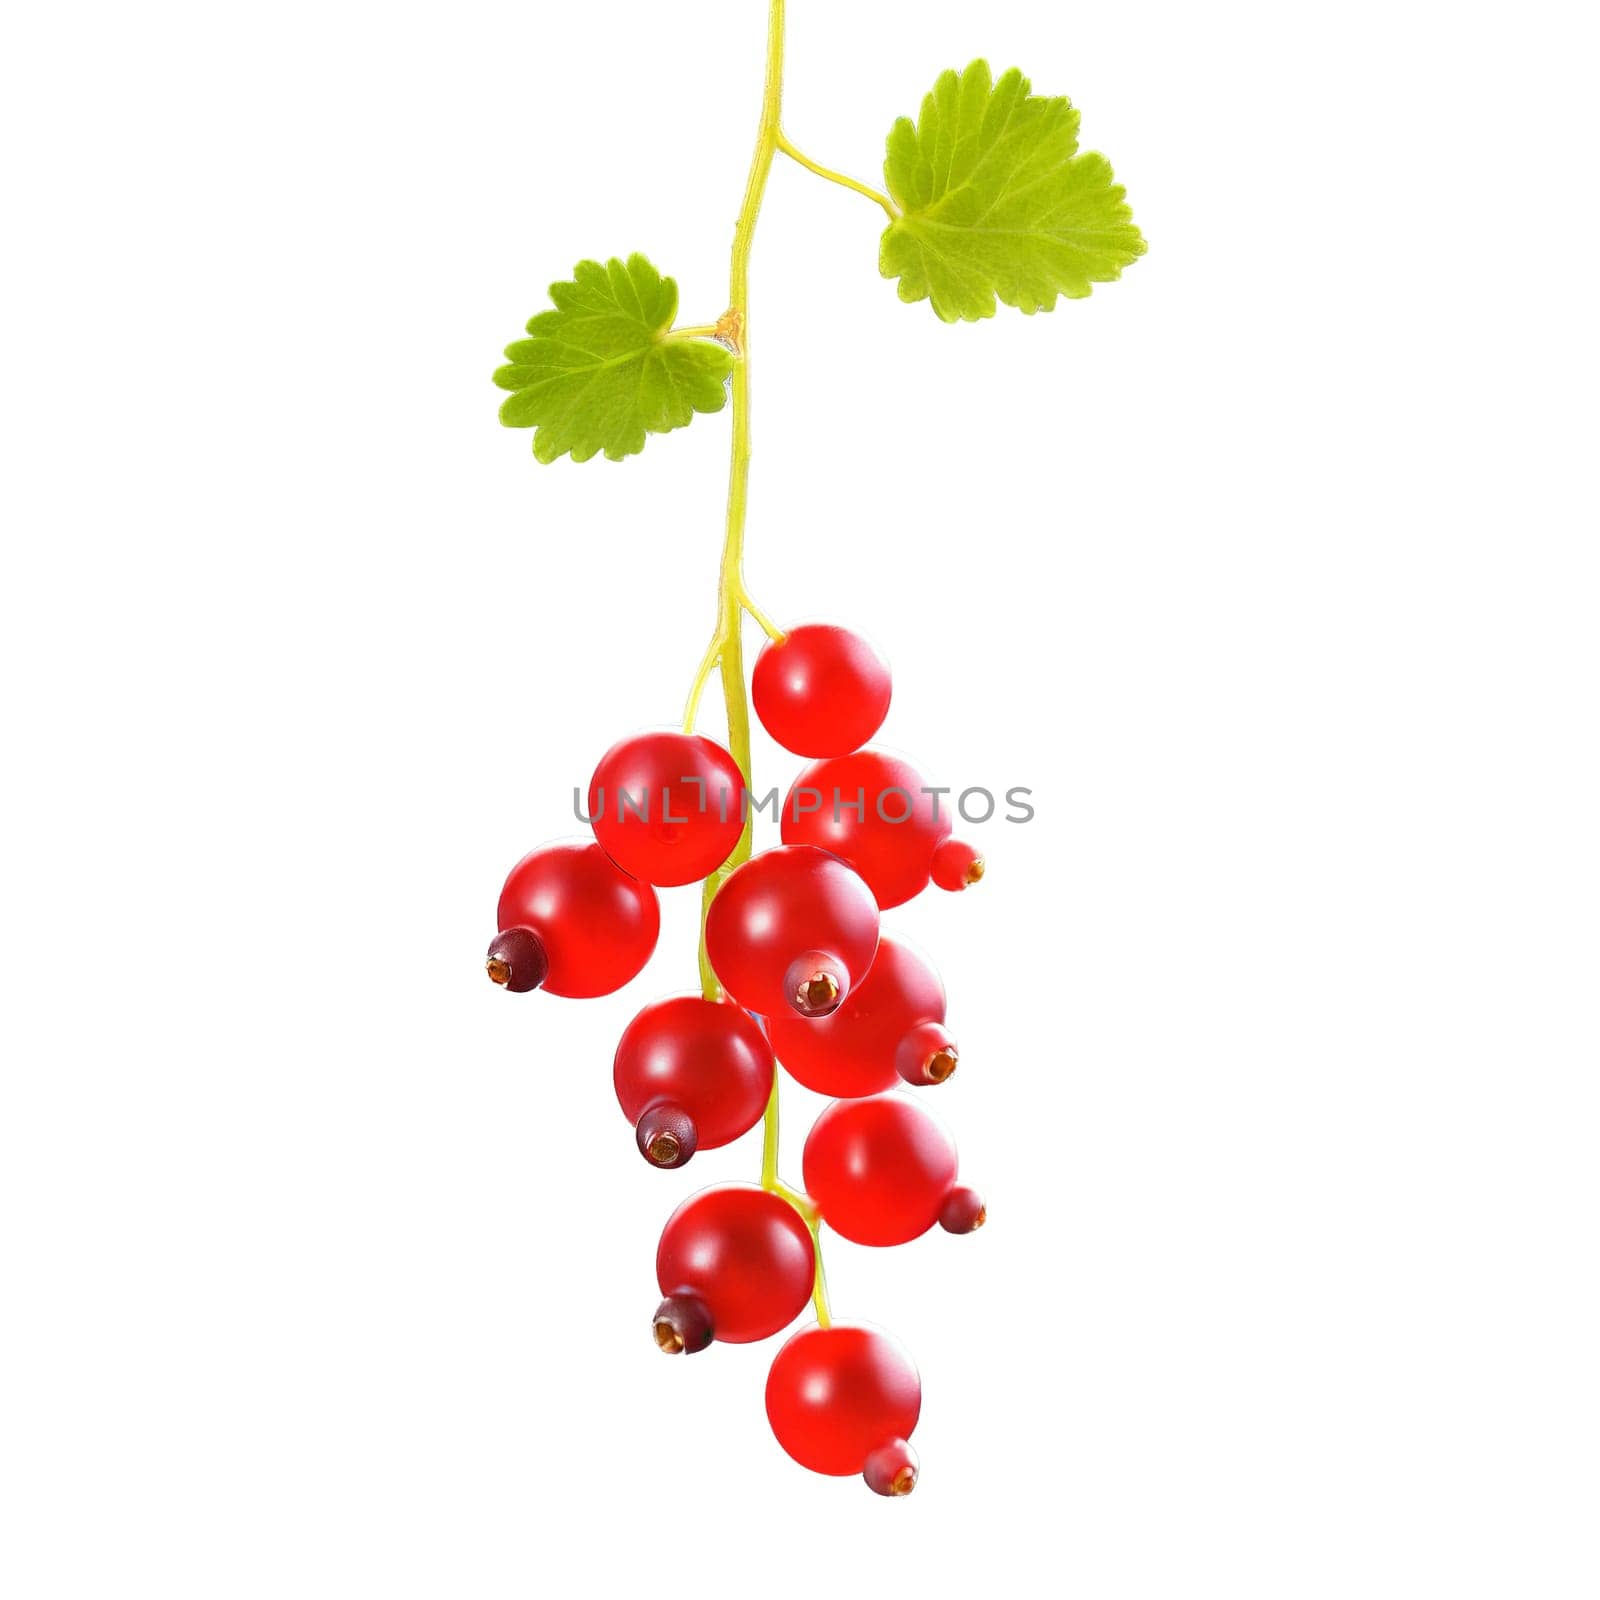 Vibrant red currants Ribes rubrum elegantly suspended from a delicate stem their translucent beauty captured. Food isolated on transparent background